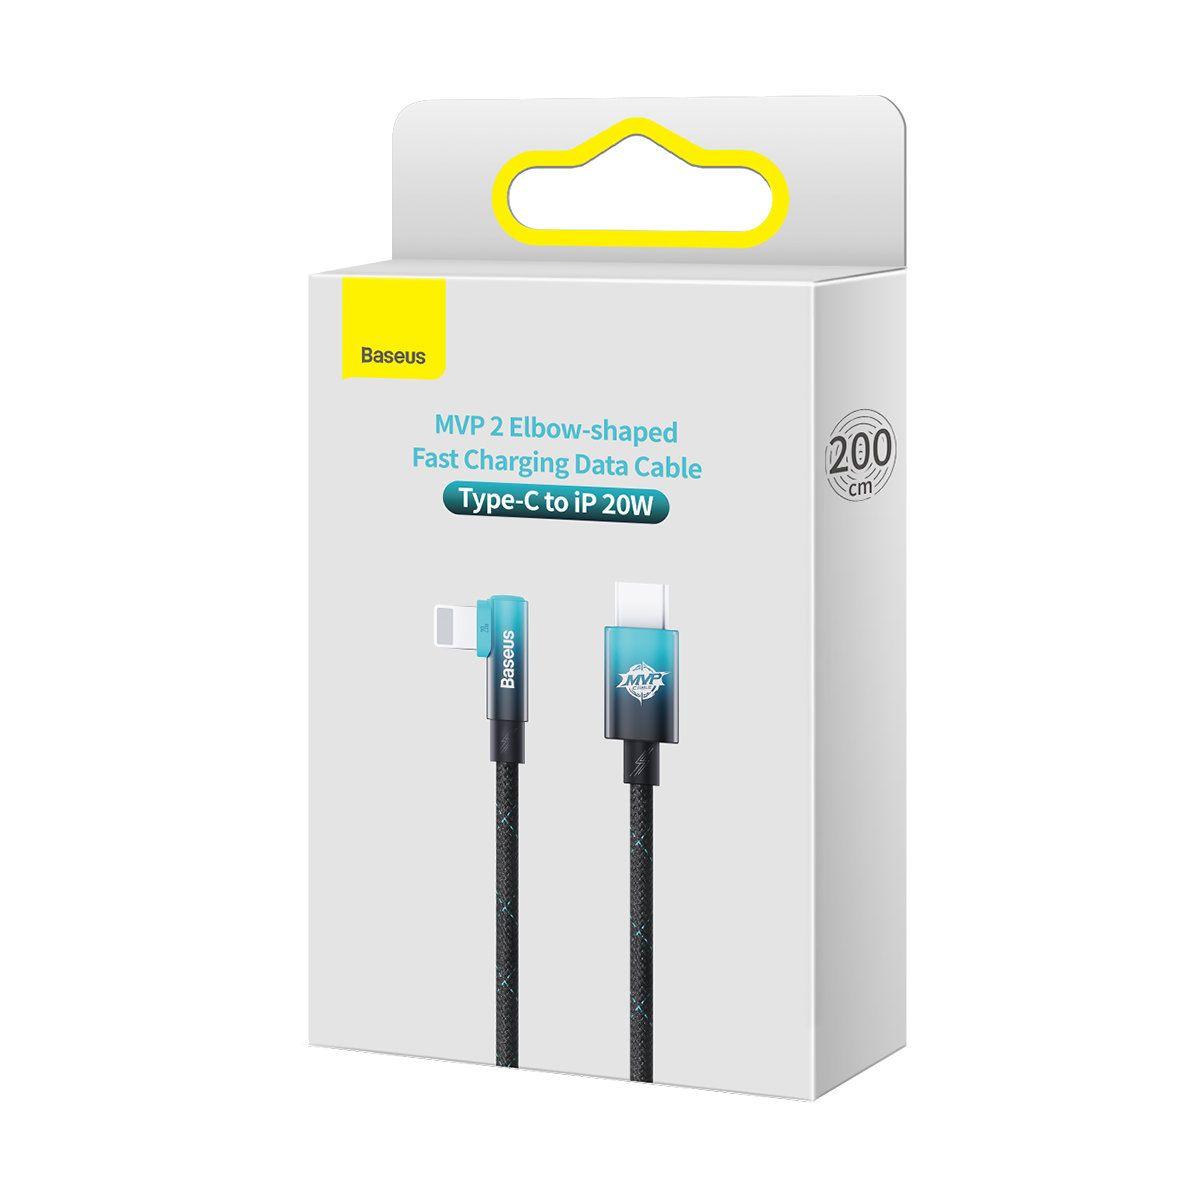 Baseus MVP 2 Elbow-shaped Fast Charging Data Cable Type-C to iP 20W 1m Black+Blue